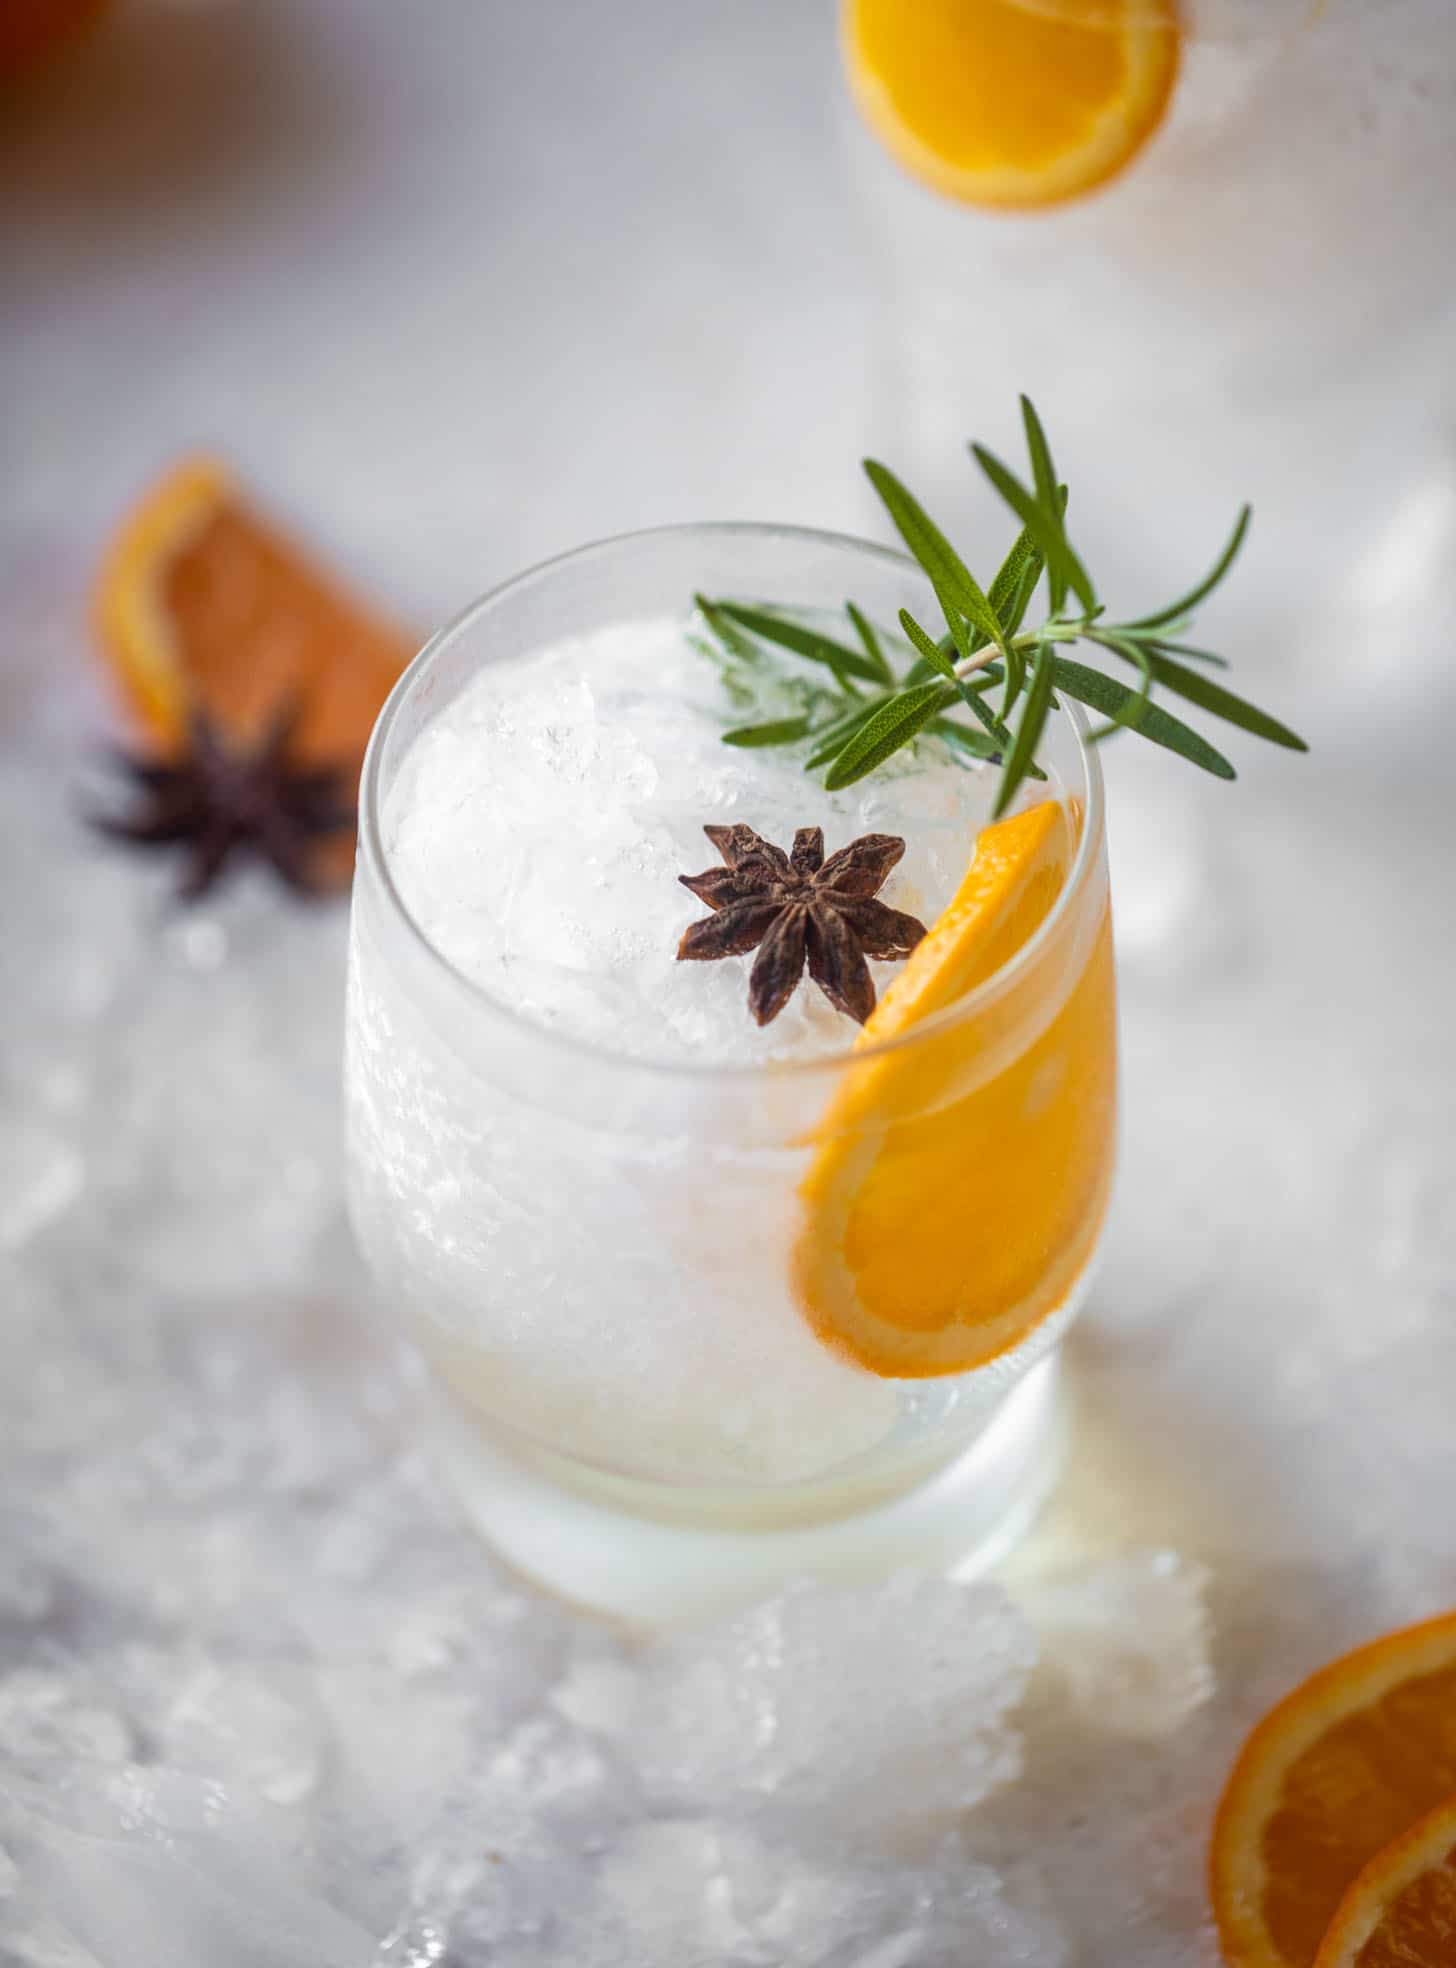 https://www.howsweeteats.com/wp-content/uploads/2021/10/spiced-orange-gin-and-tonic-18.jpg